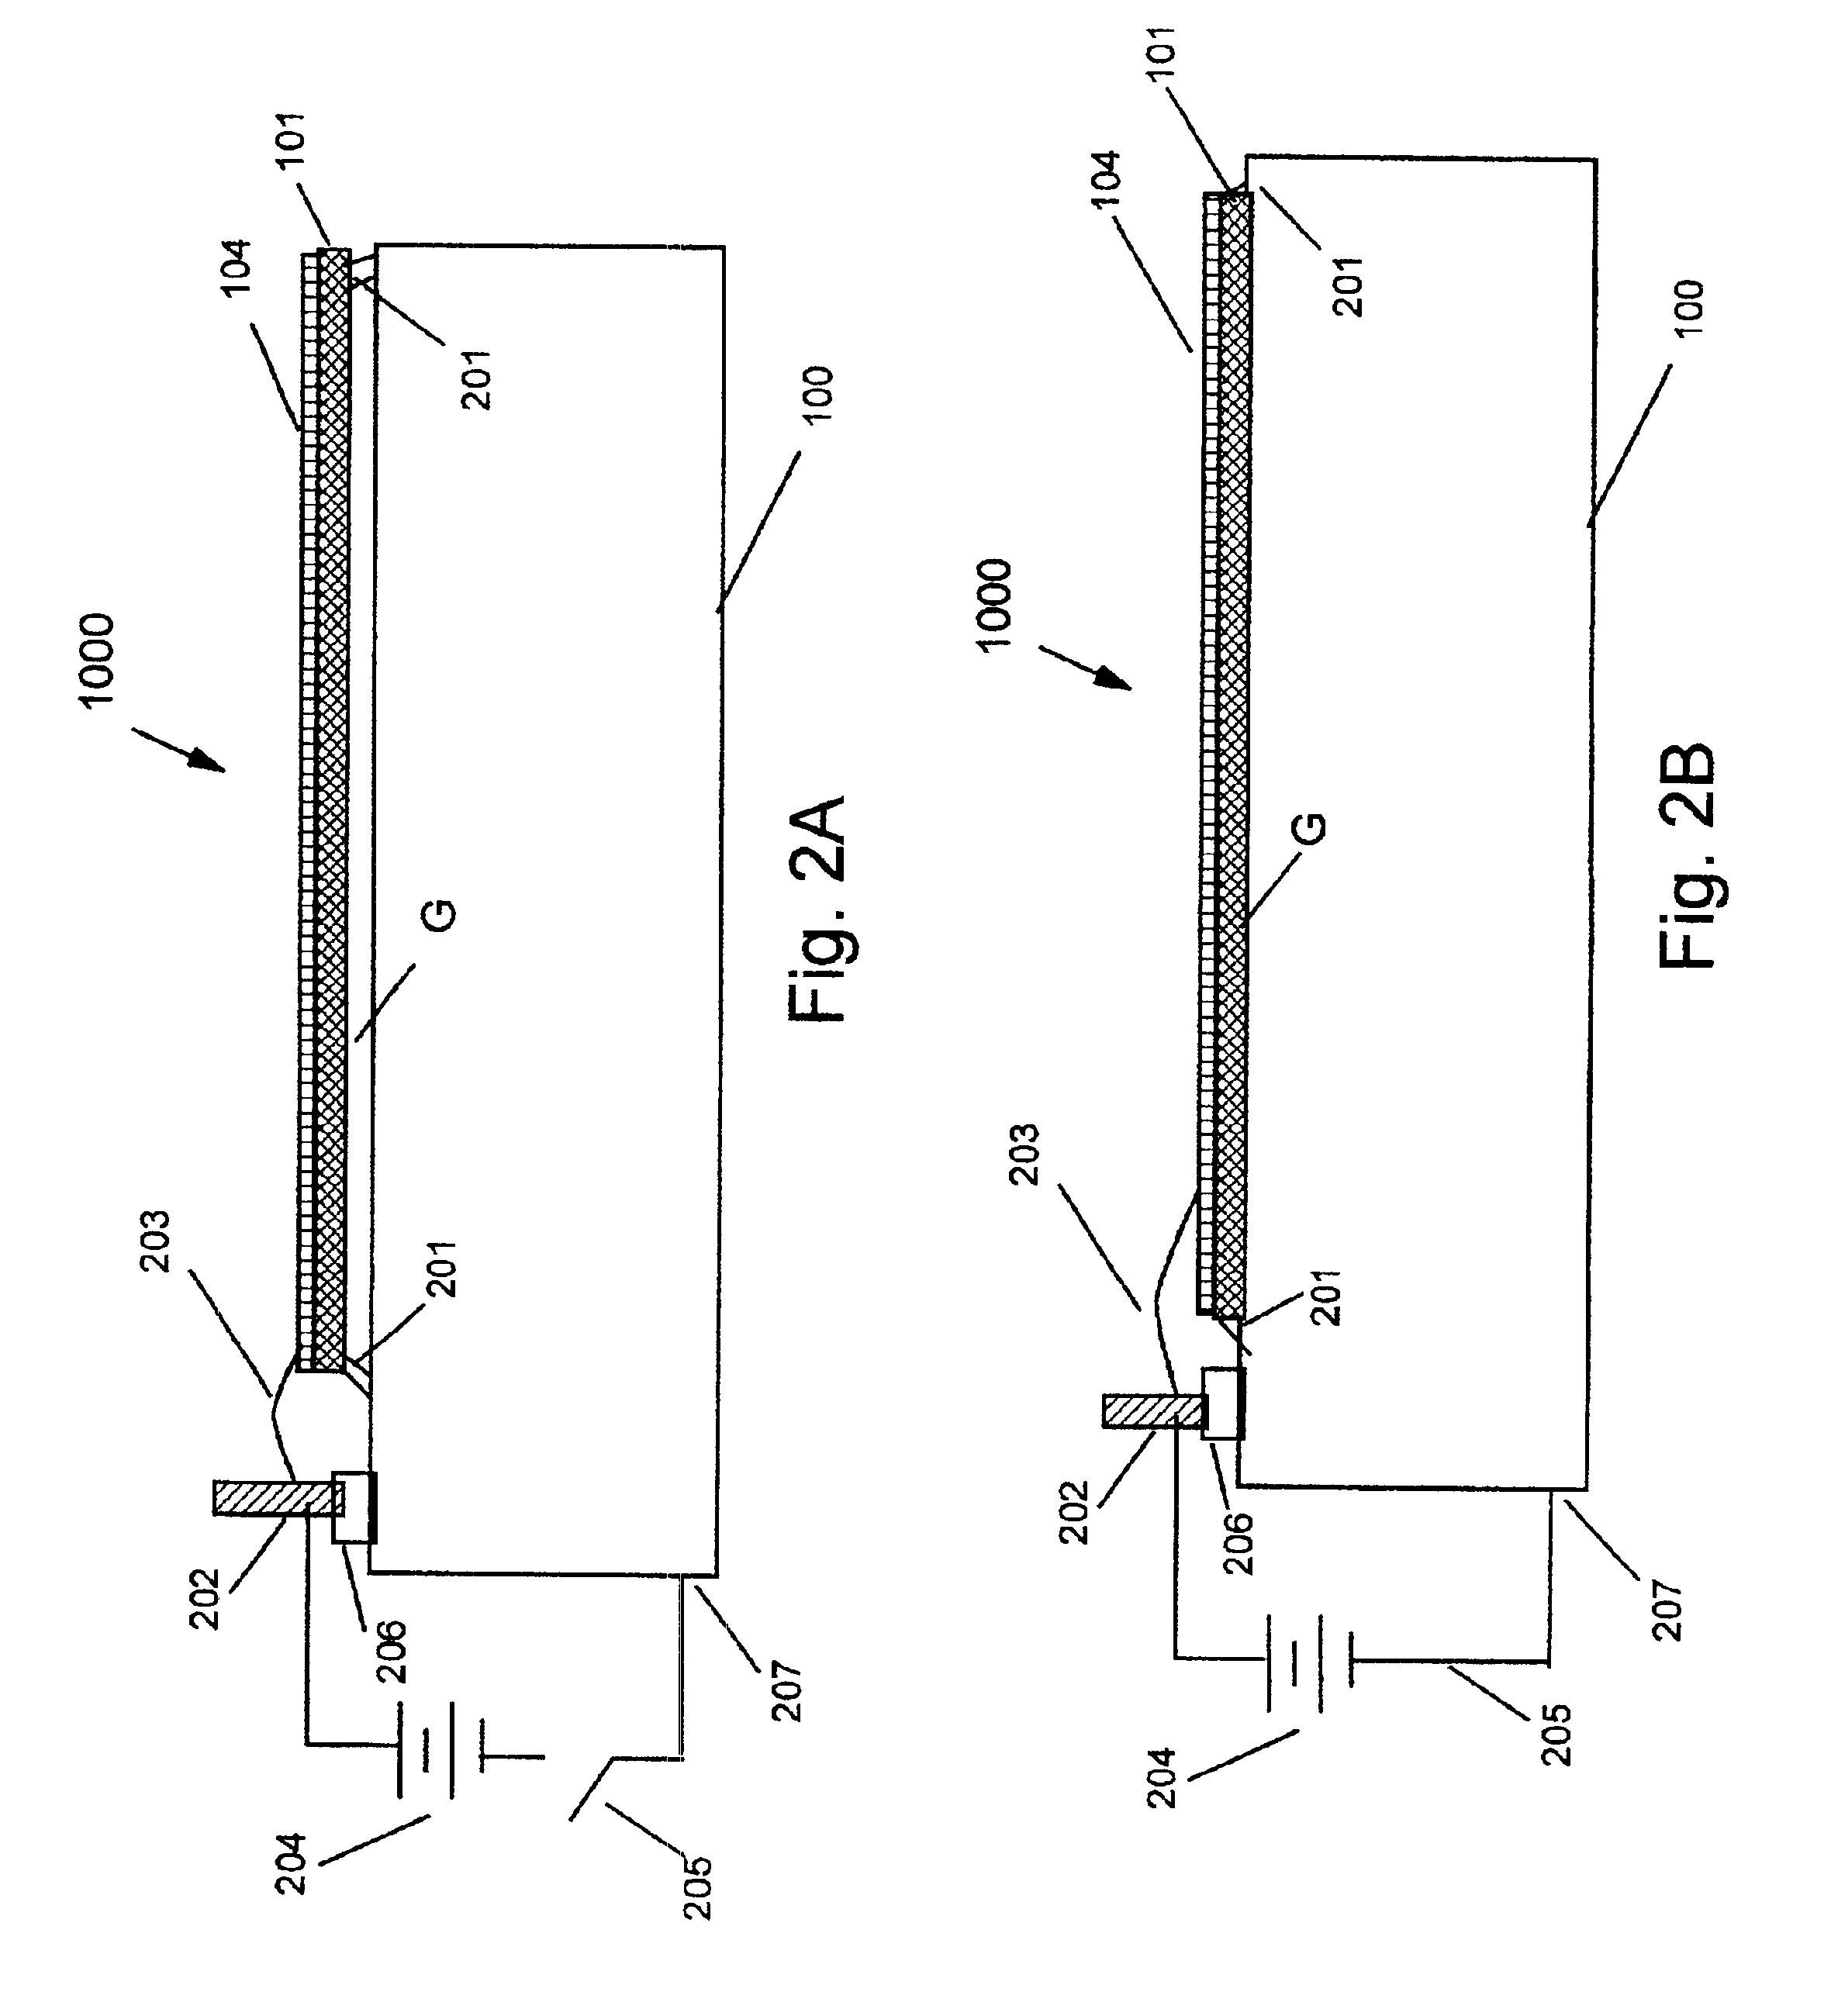 Electrostatic switched radiator for space based thermal control